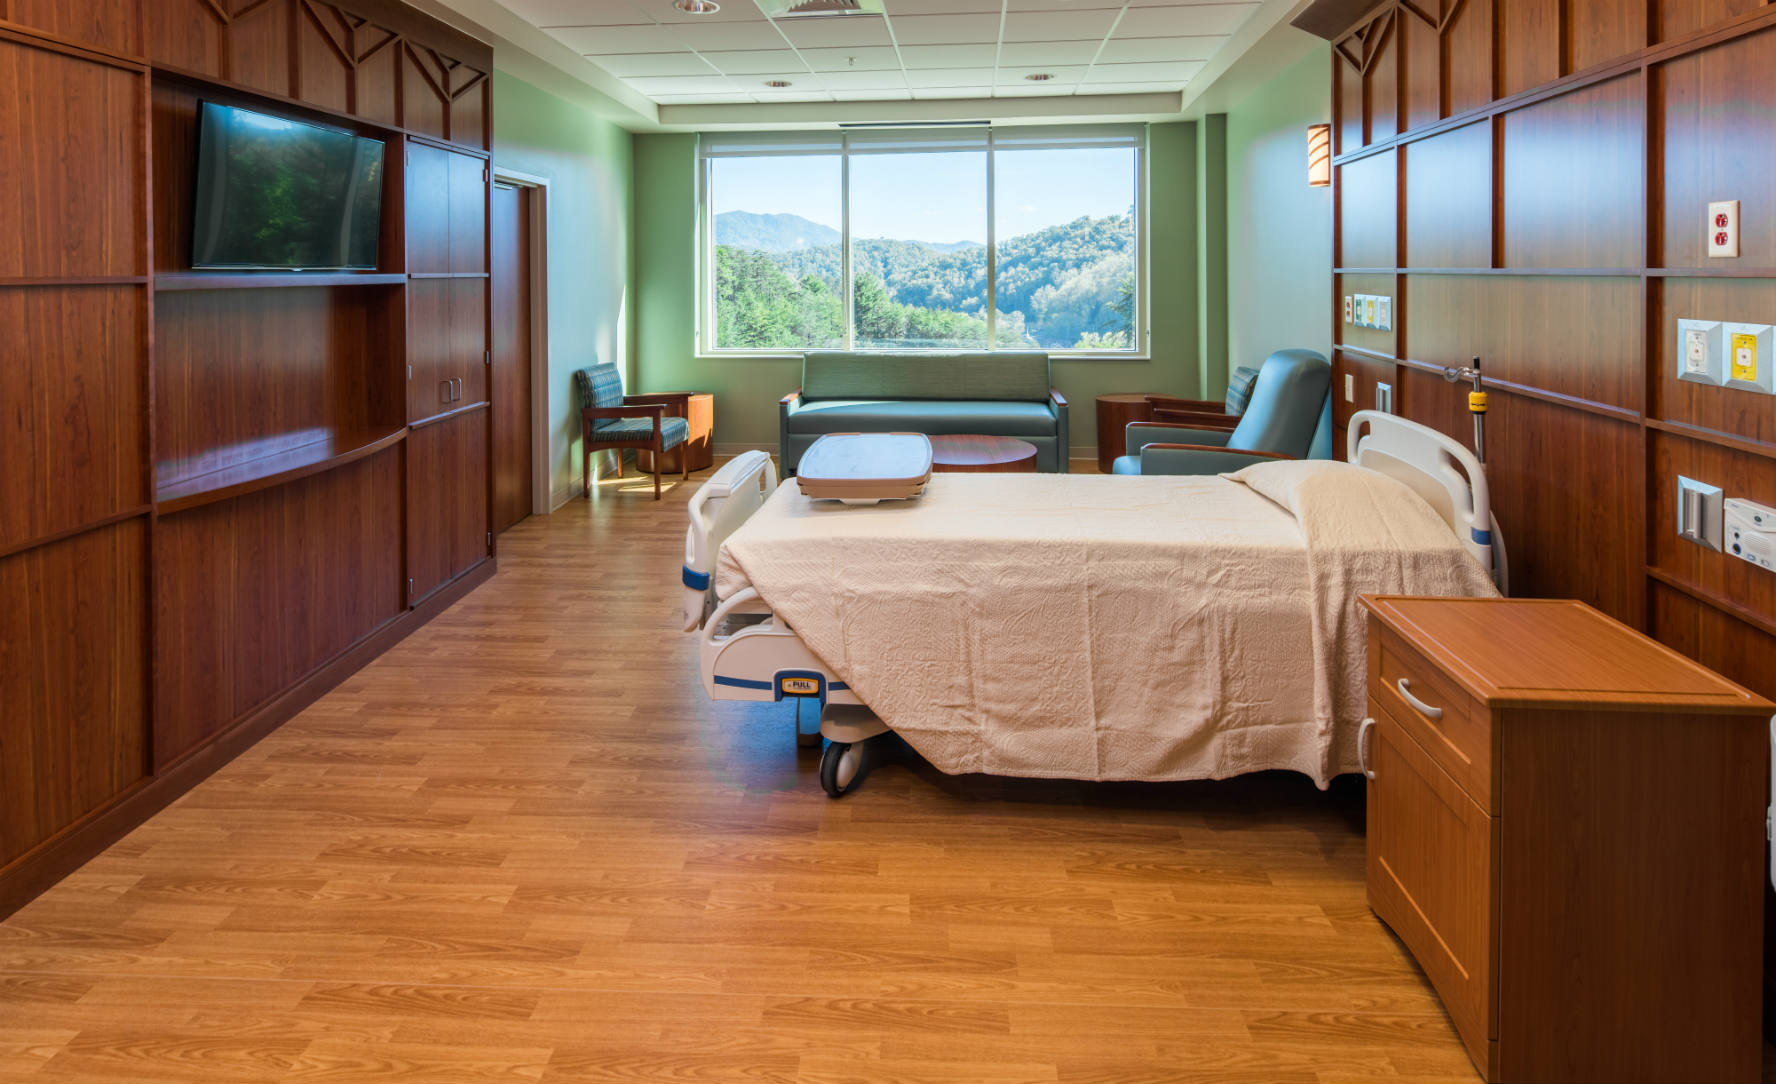 Inside a patient room at Cherokee Hospital